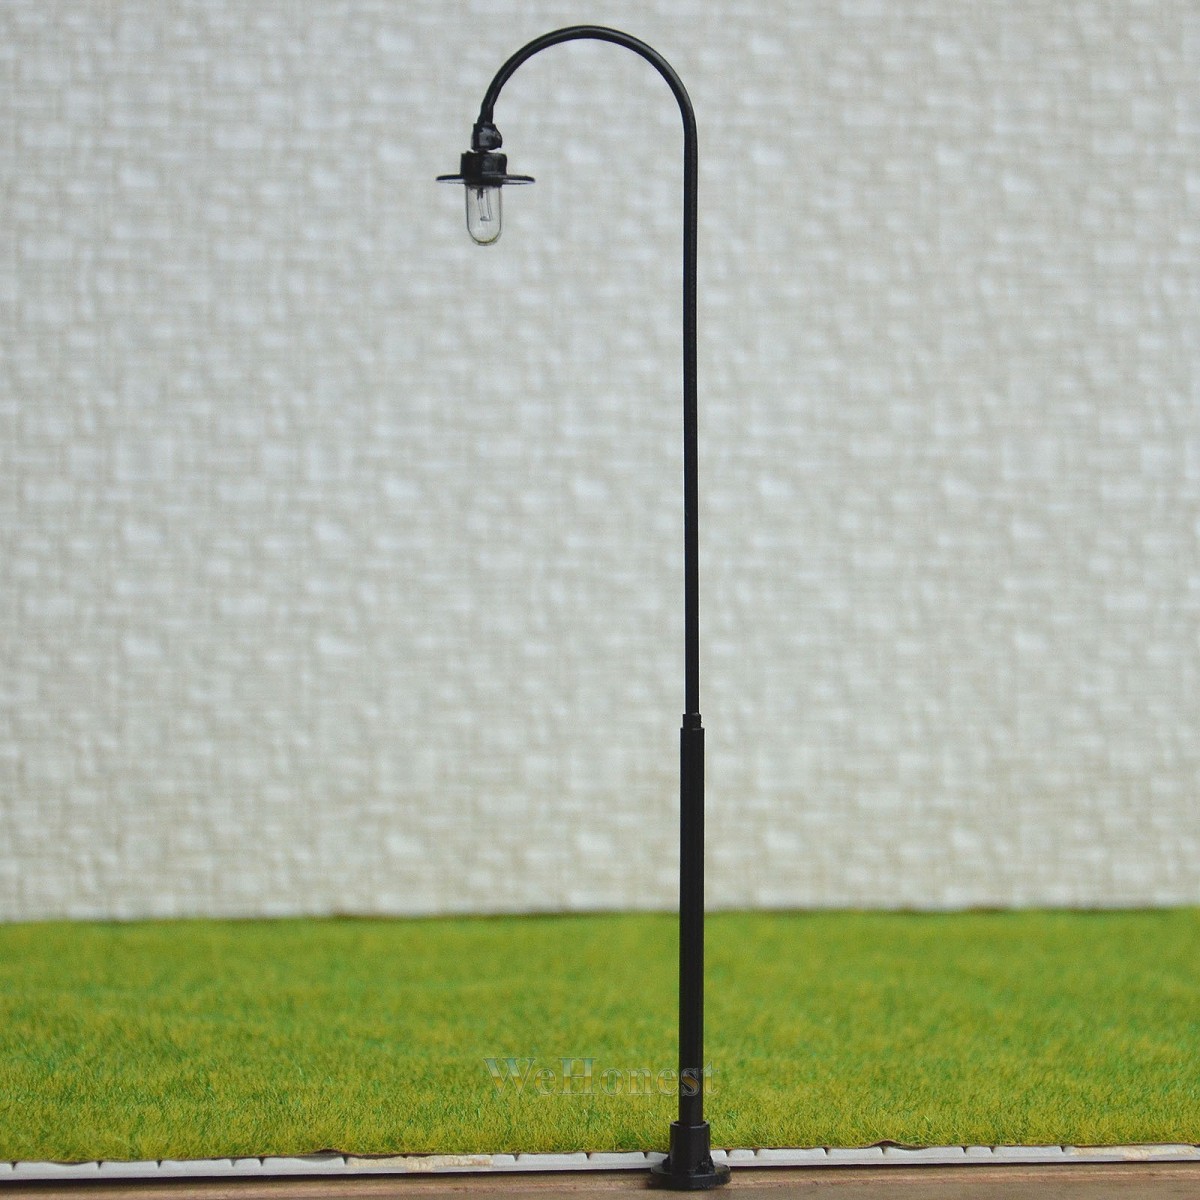 1 x O scale Raplaceable Model Lamppost street light Lamp easy Maintain #RB33-O